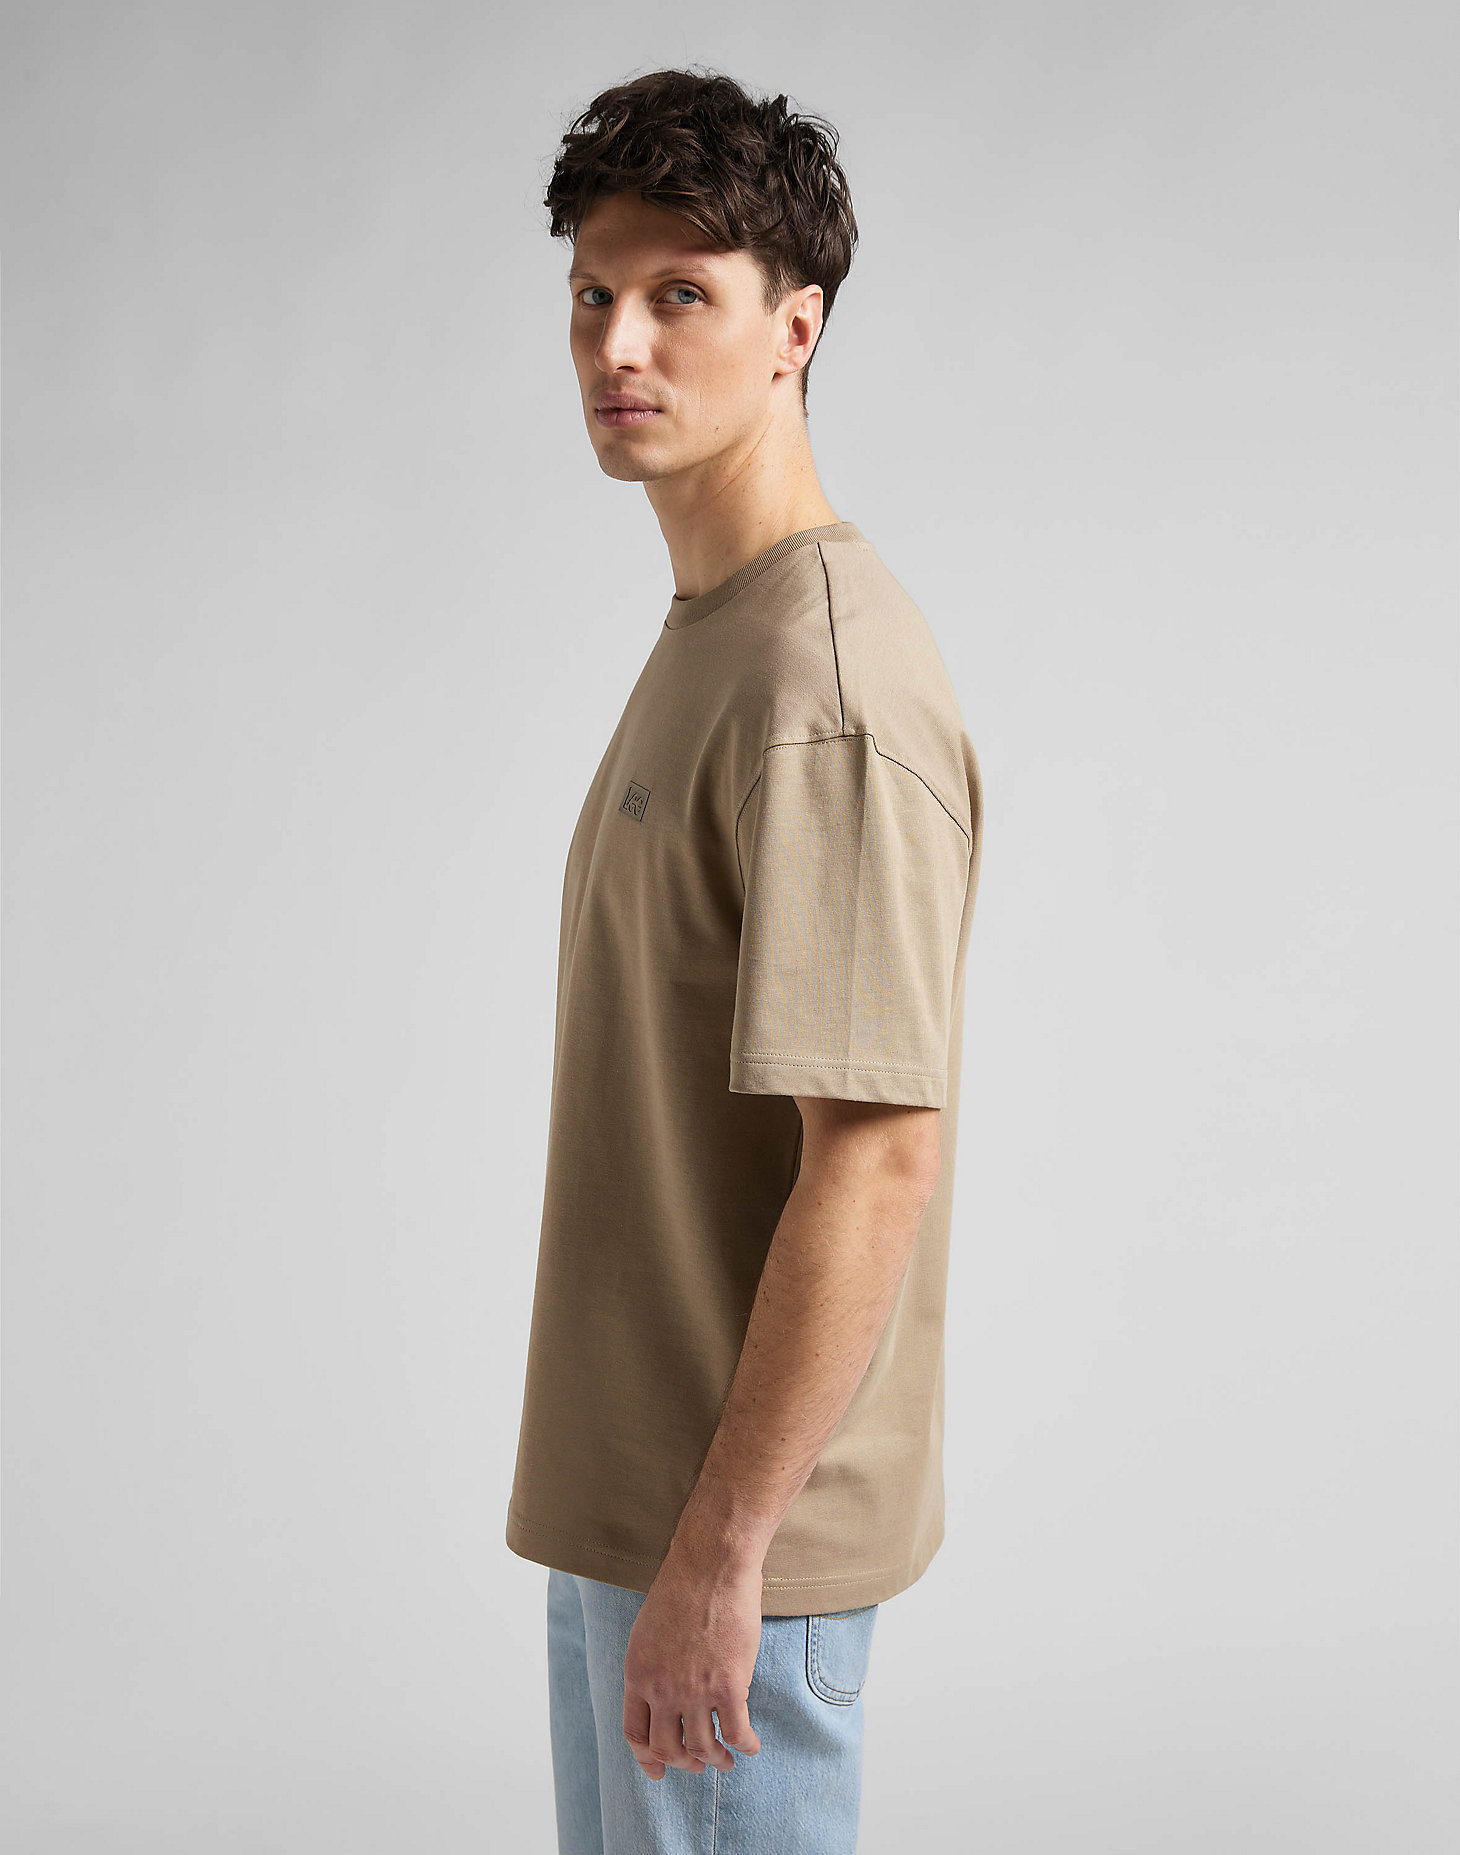 Core Loose Tee in Clay alternative view 3